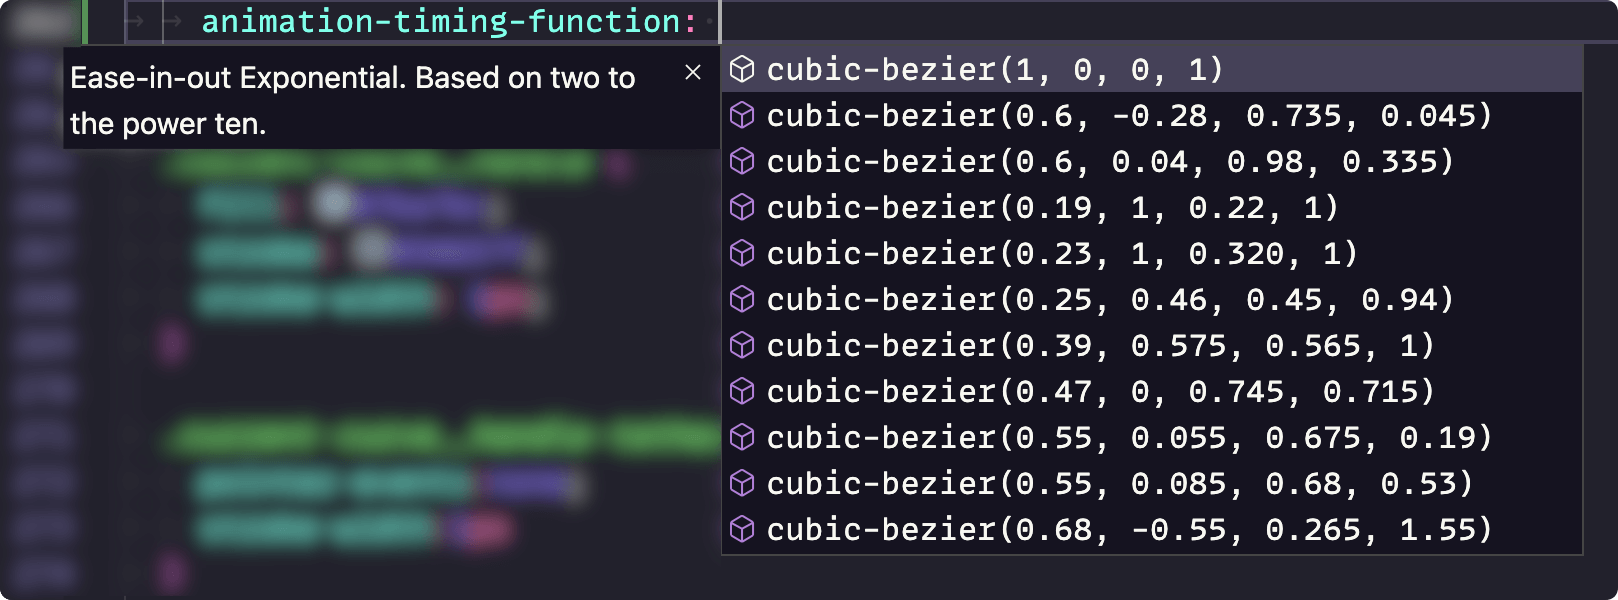 VS Code auto-completing cubic-bezier with a variety of options in a pop-up UI